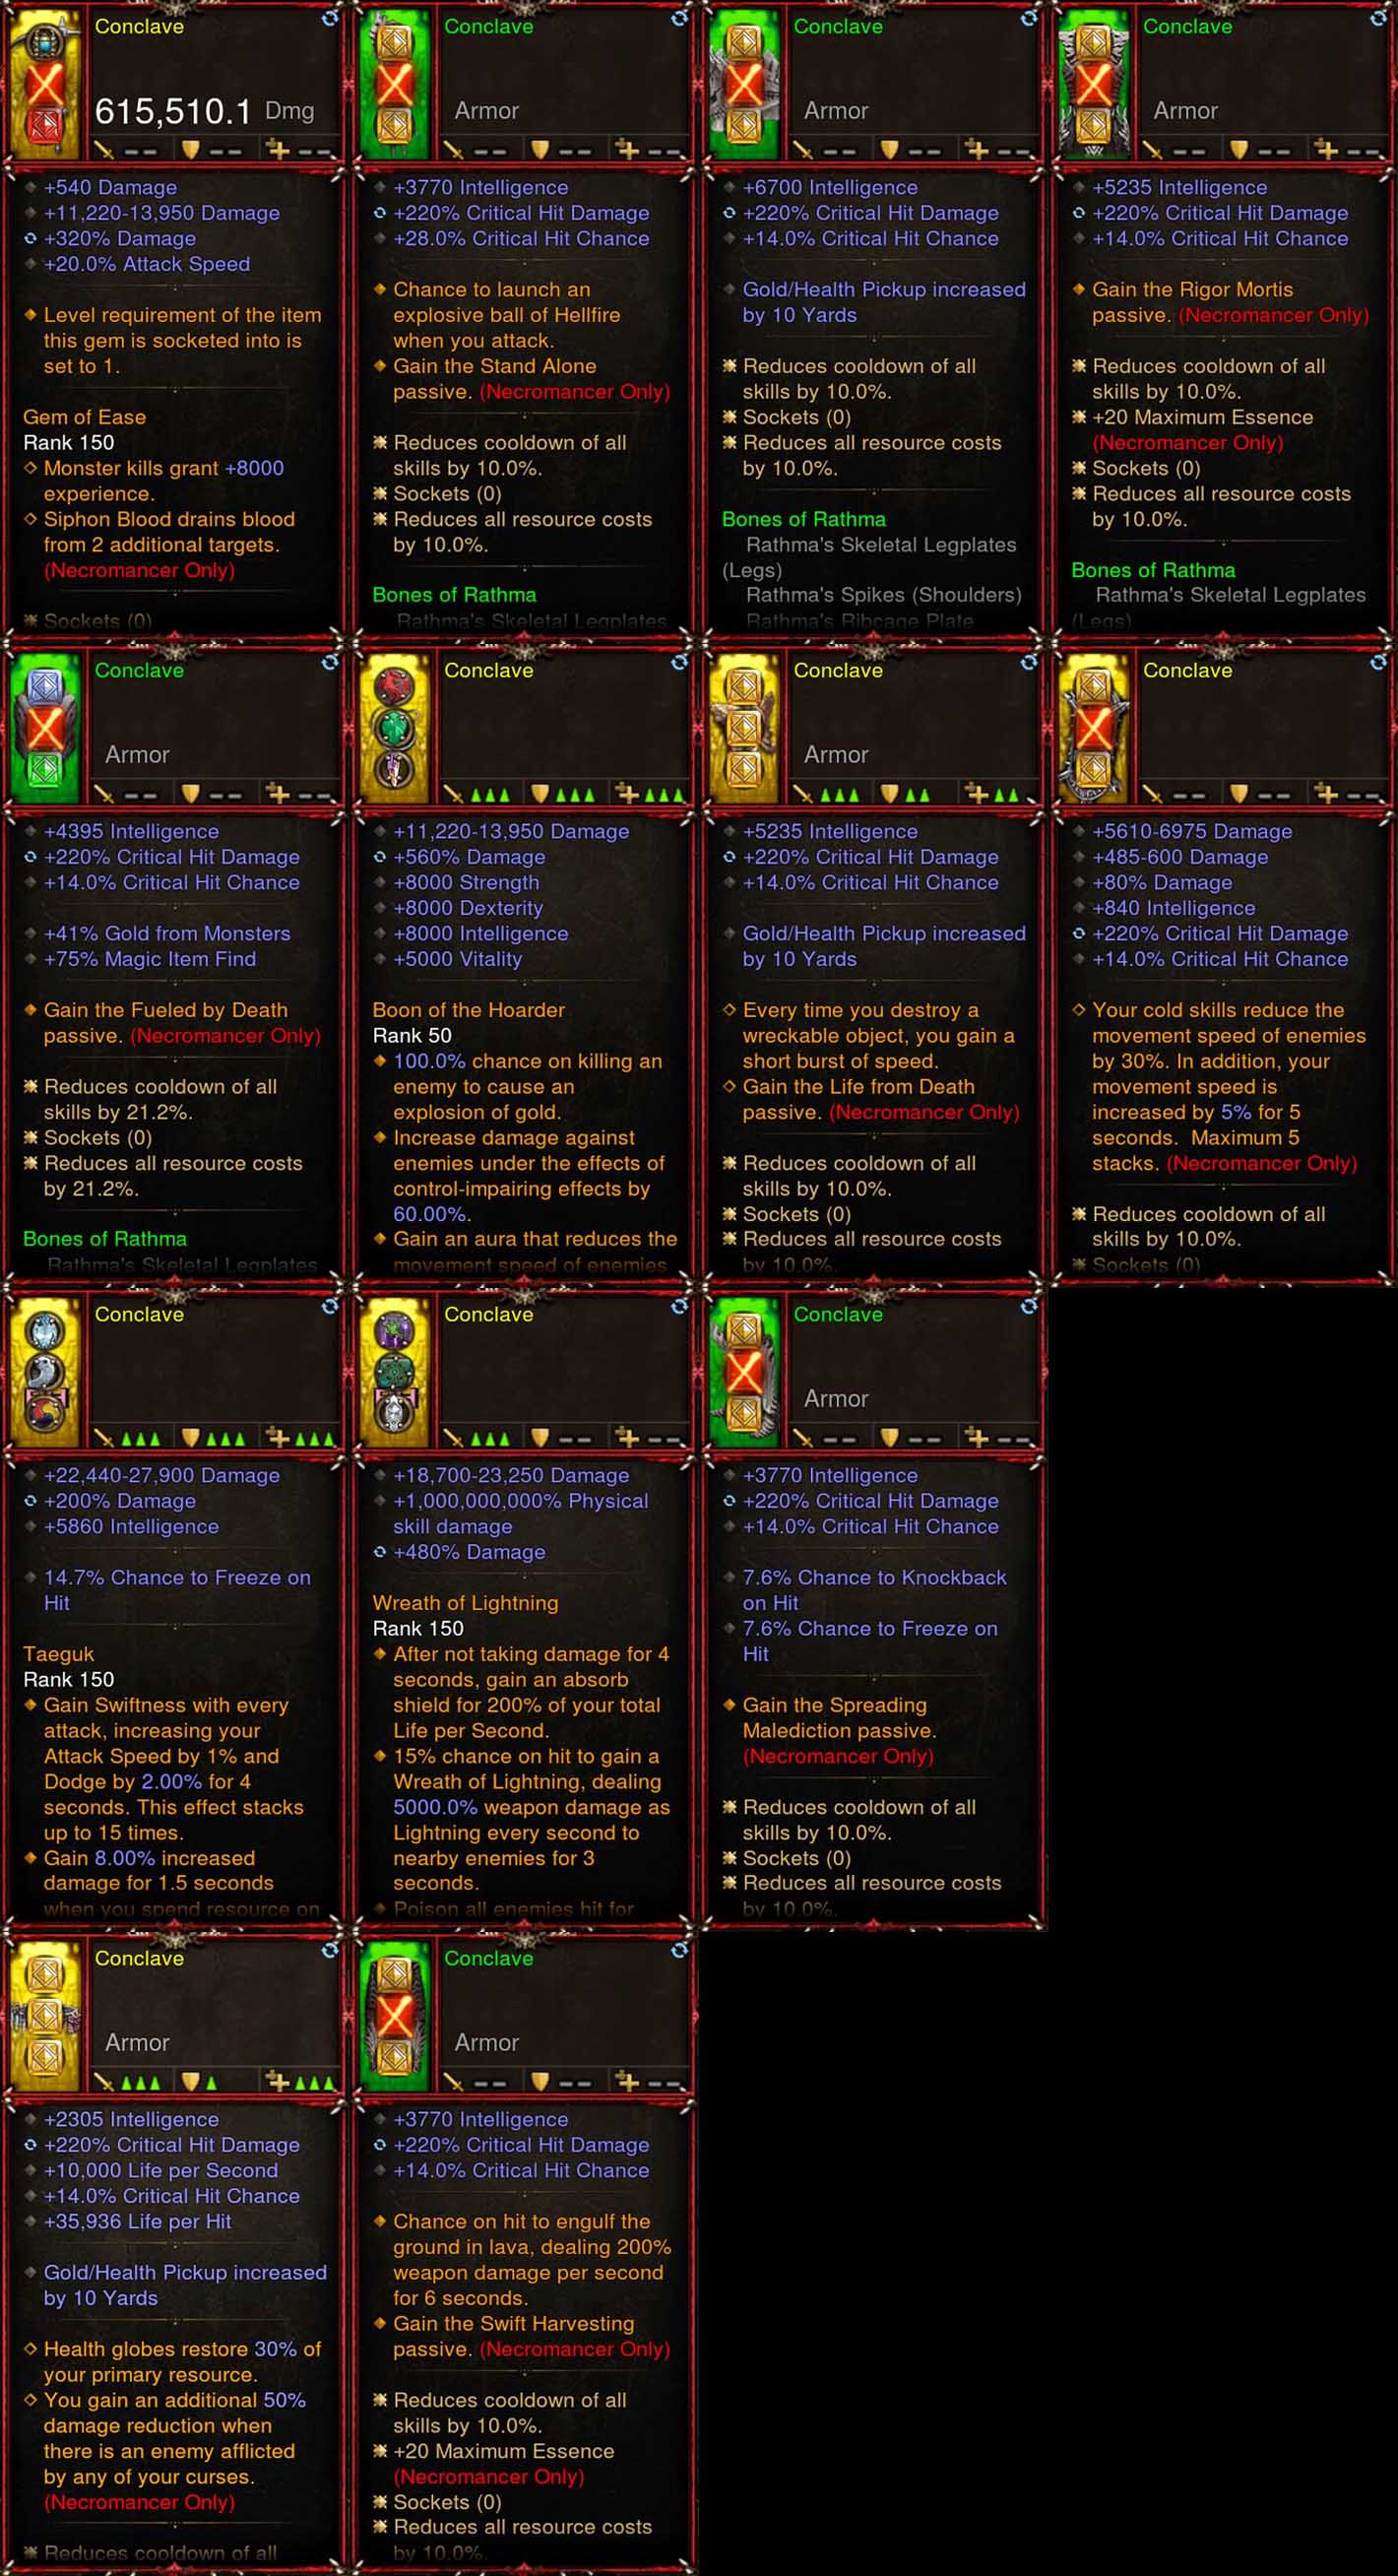 [Primal Ancient] 1-70 Rathma Necromancer Set Conclave for gRift 150 Diablo 3 Mods ROS Seasonal and Non Seasonal Save Mod - Modded Items and Gear - Hacks - Cheats - Trainers for Playstation 4 - Playstation 5 - Nintendo Switch - Xbox One